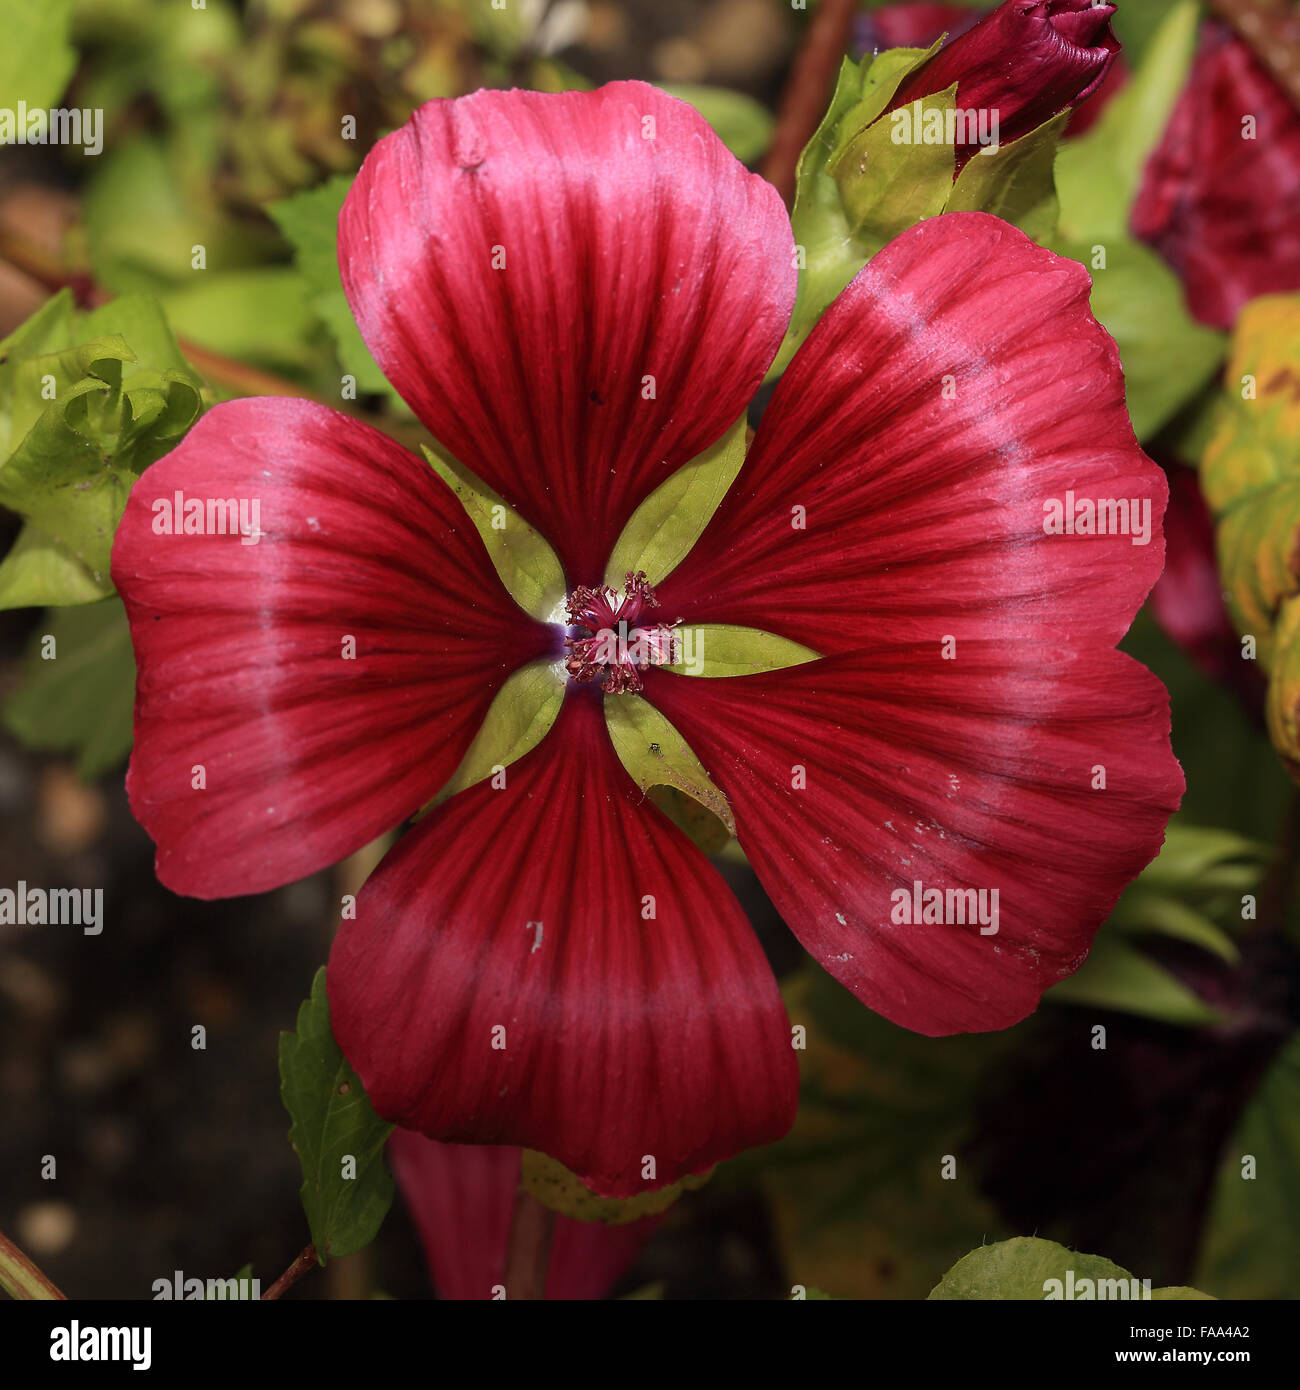 Annual Malope, (Malope trfida) flower, from the western Mediterranean. Stock Photo